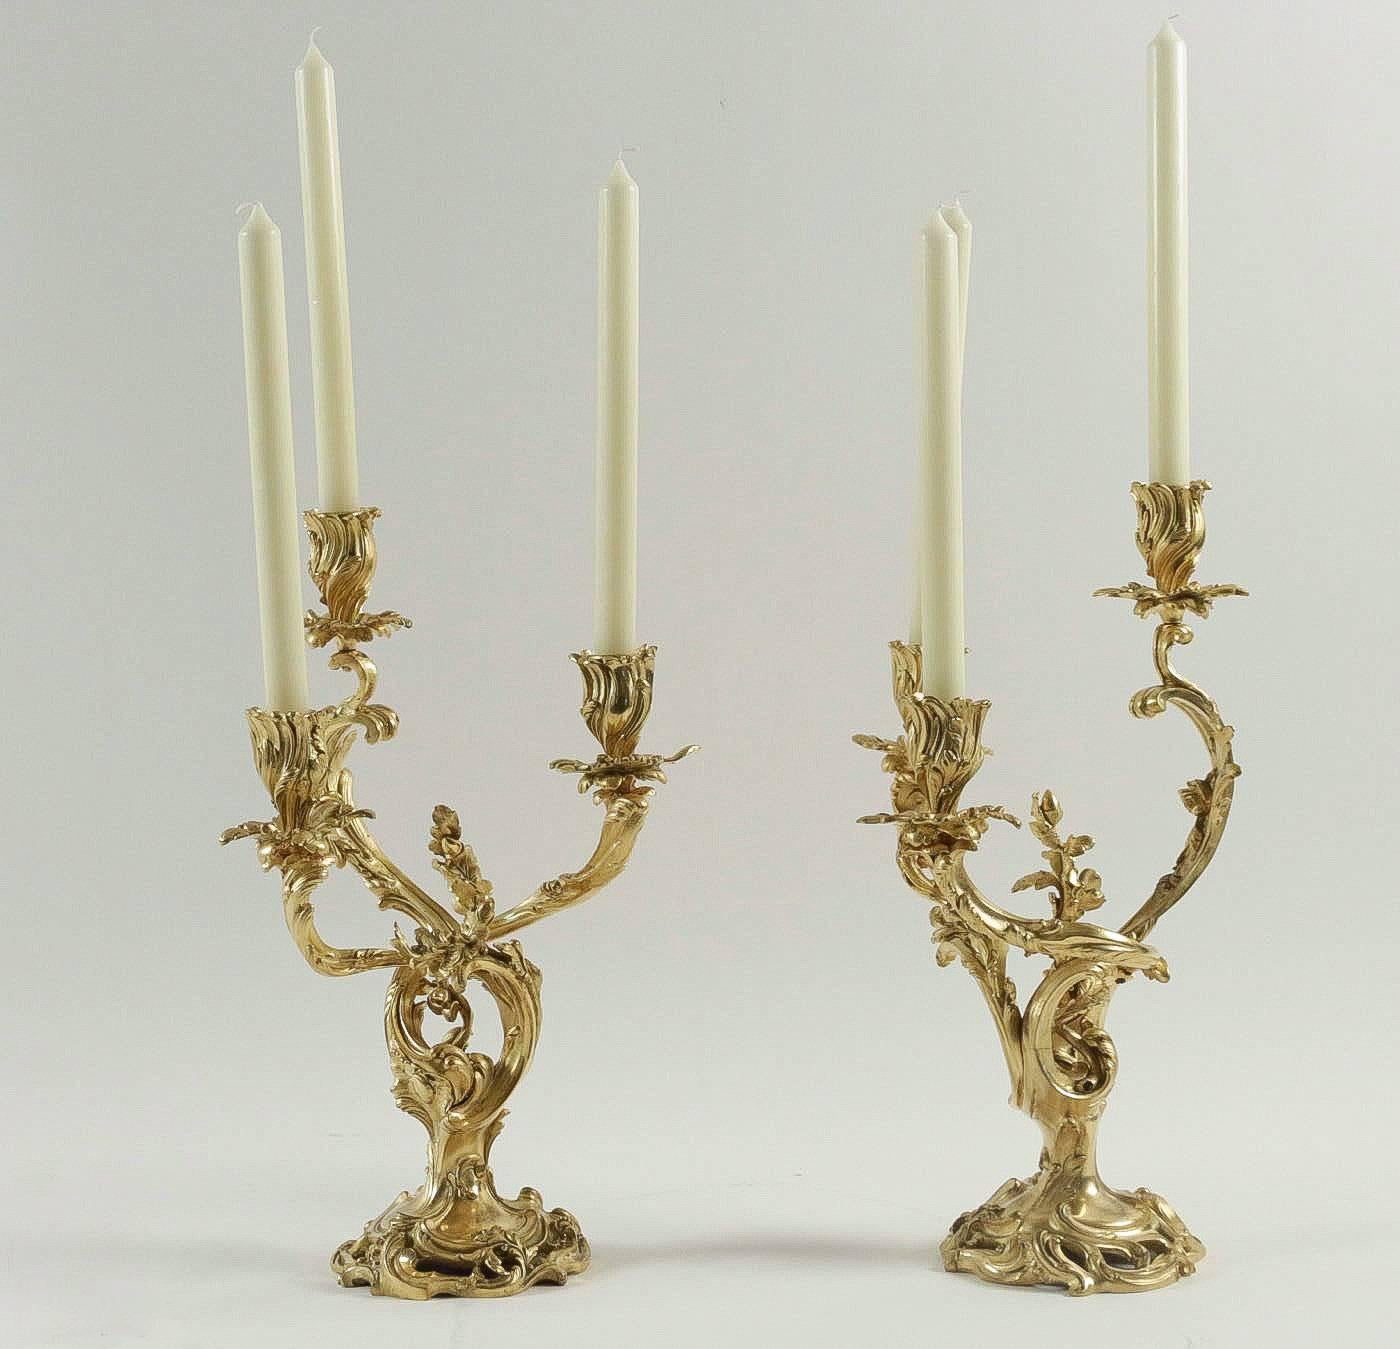 An exciting and elegant pair of candelabras, with three candlesticks arm-lights, in the classic Louis XV Rocaille style.
Original gilt bronze candelabras, finely chiseled of foliage, oak leaves, and acorn decoration.
Our candelabras rest on lovely